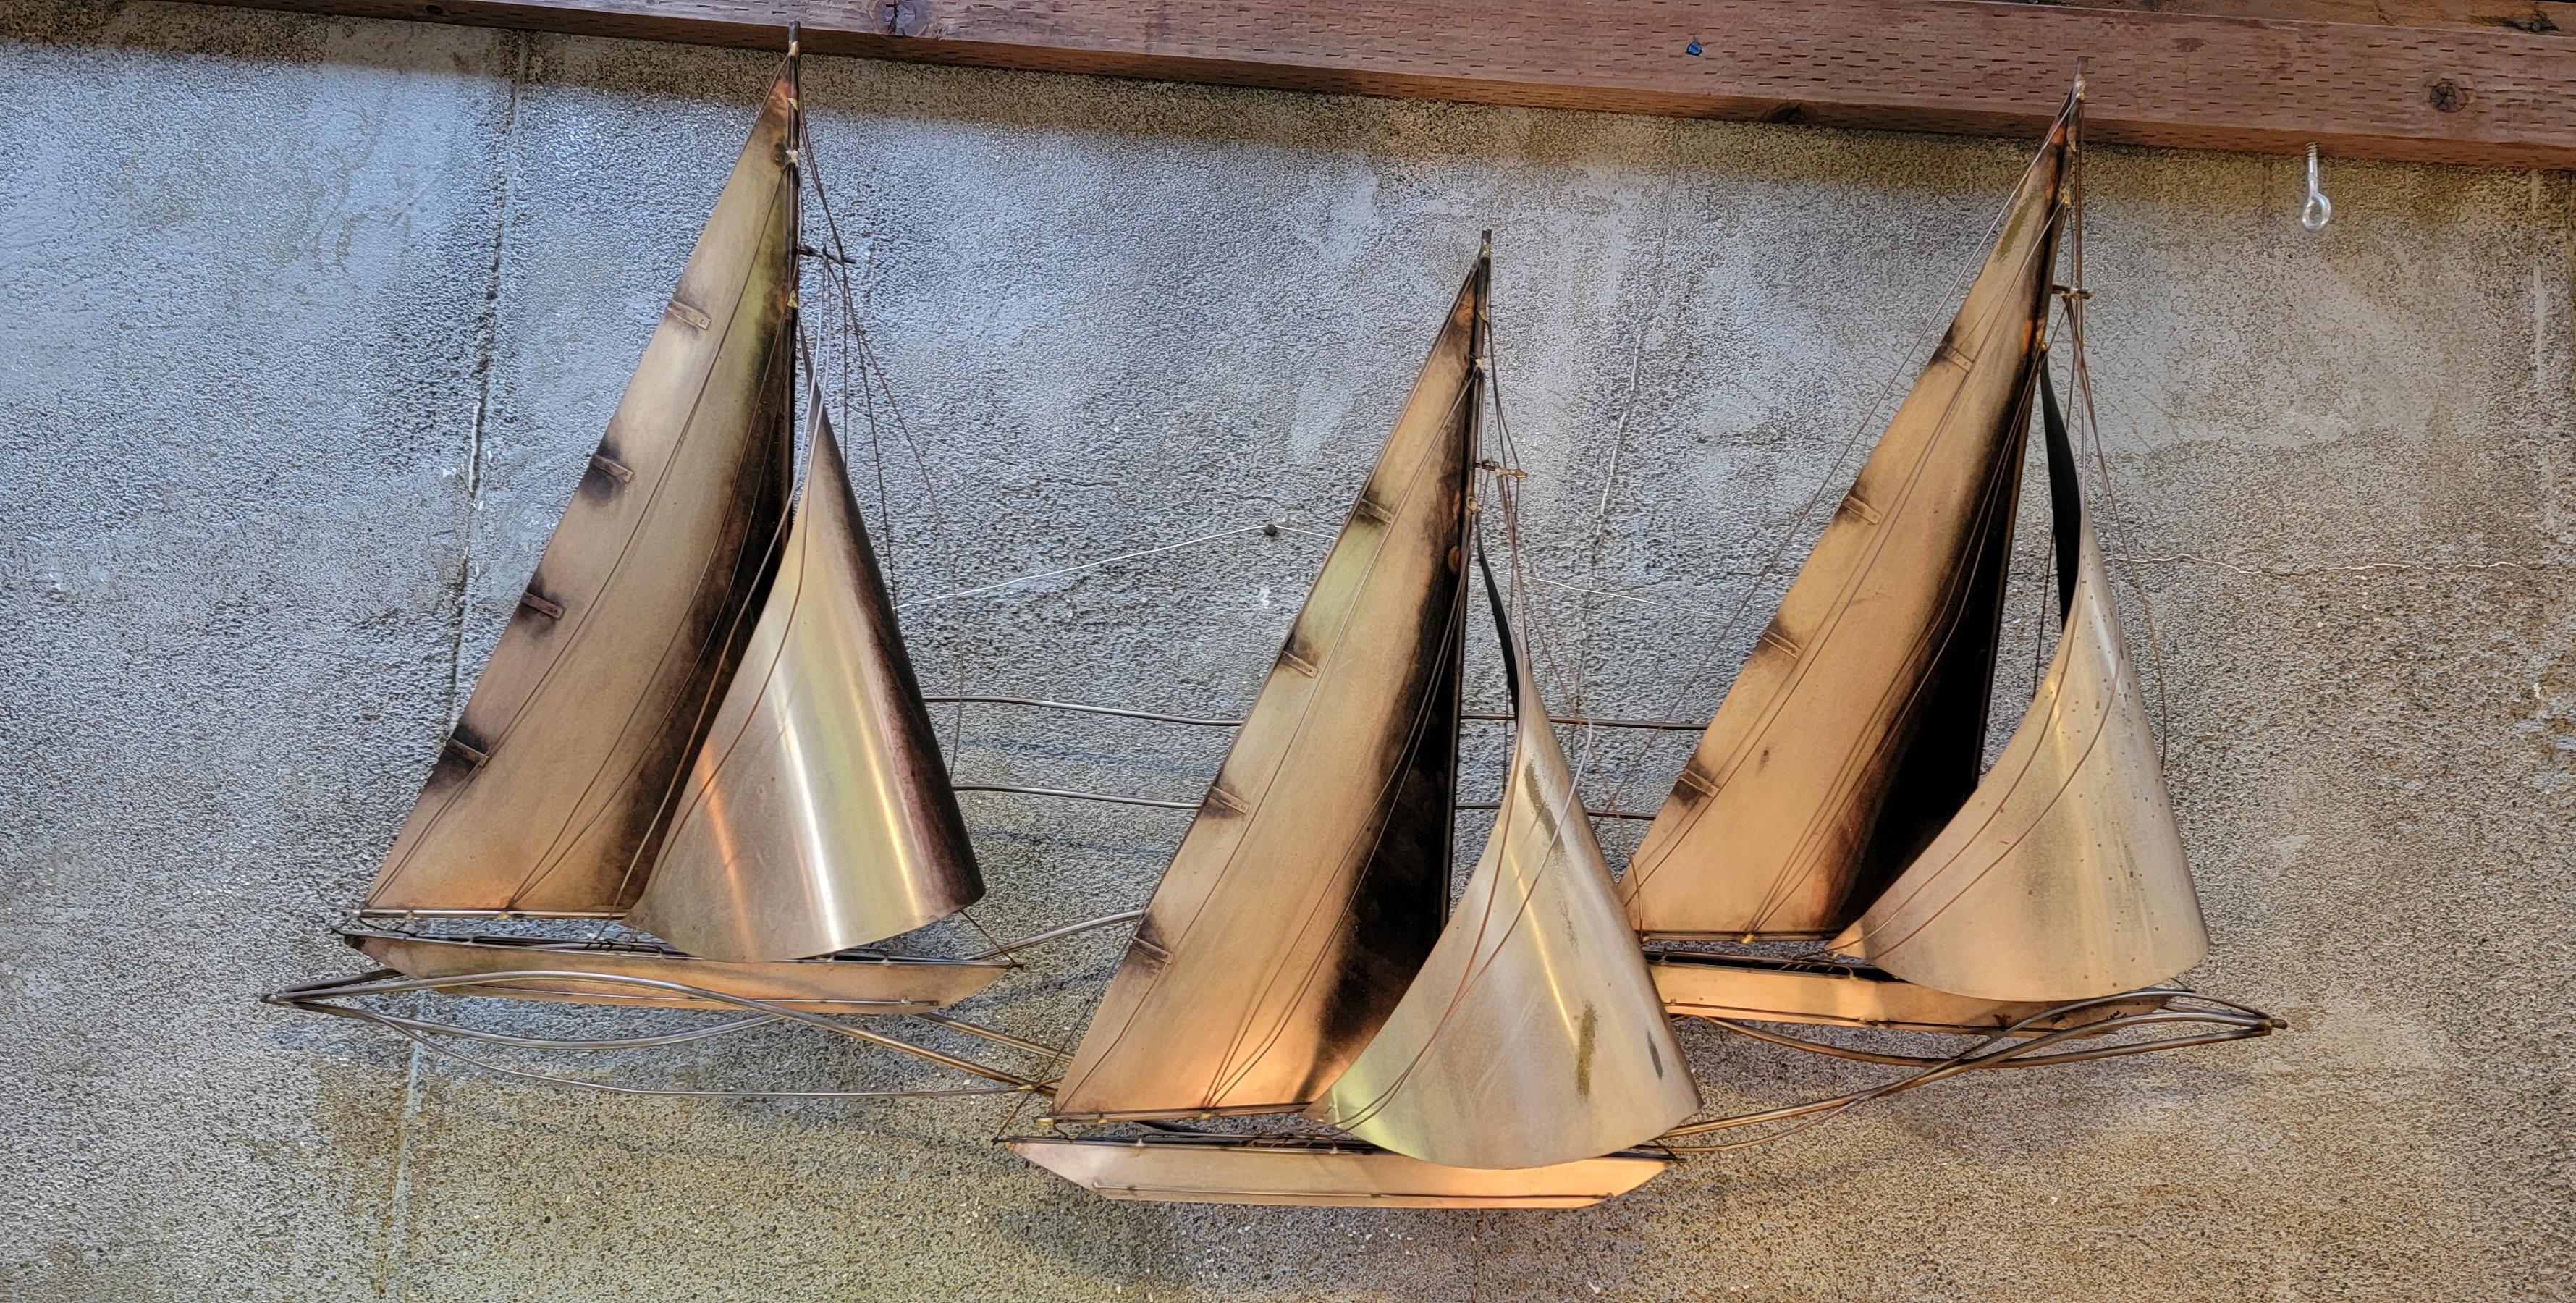 Large-scale copper and brass wall mounted sculpture by Curtis Jere. Nautical theme with 3 sailboats. Signed C. Jere and dated 1977. Measures 52 inched wide.